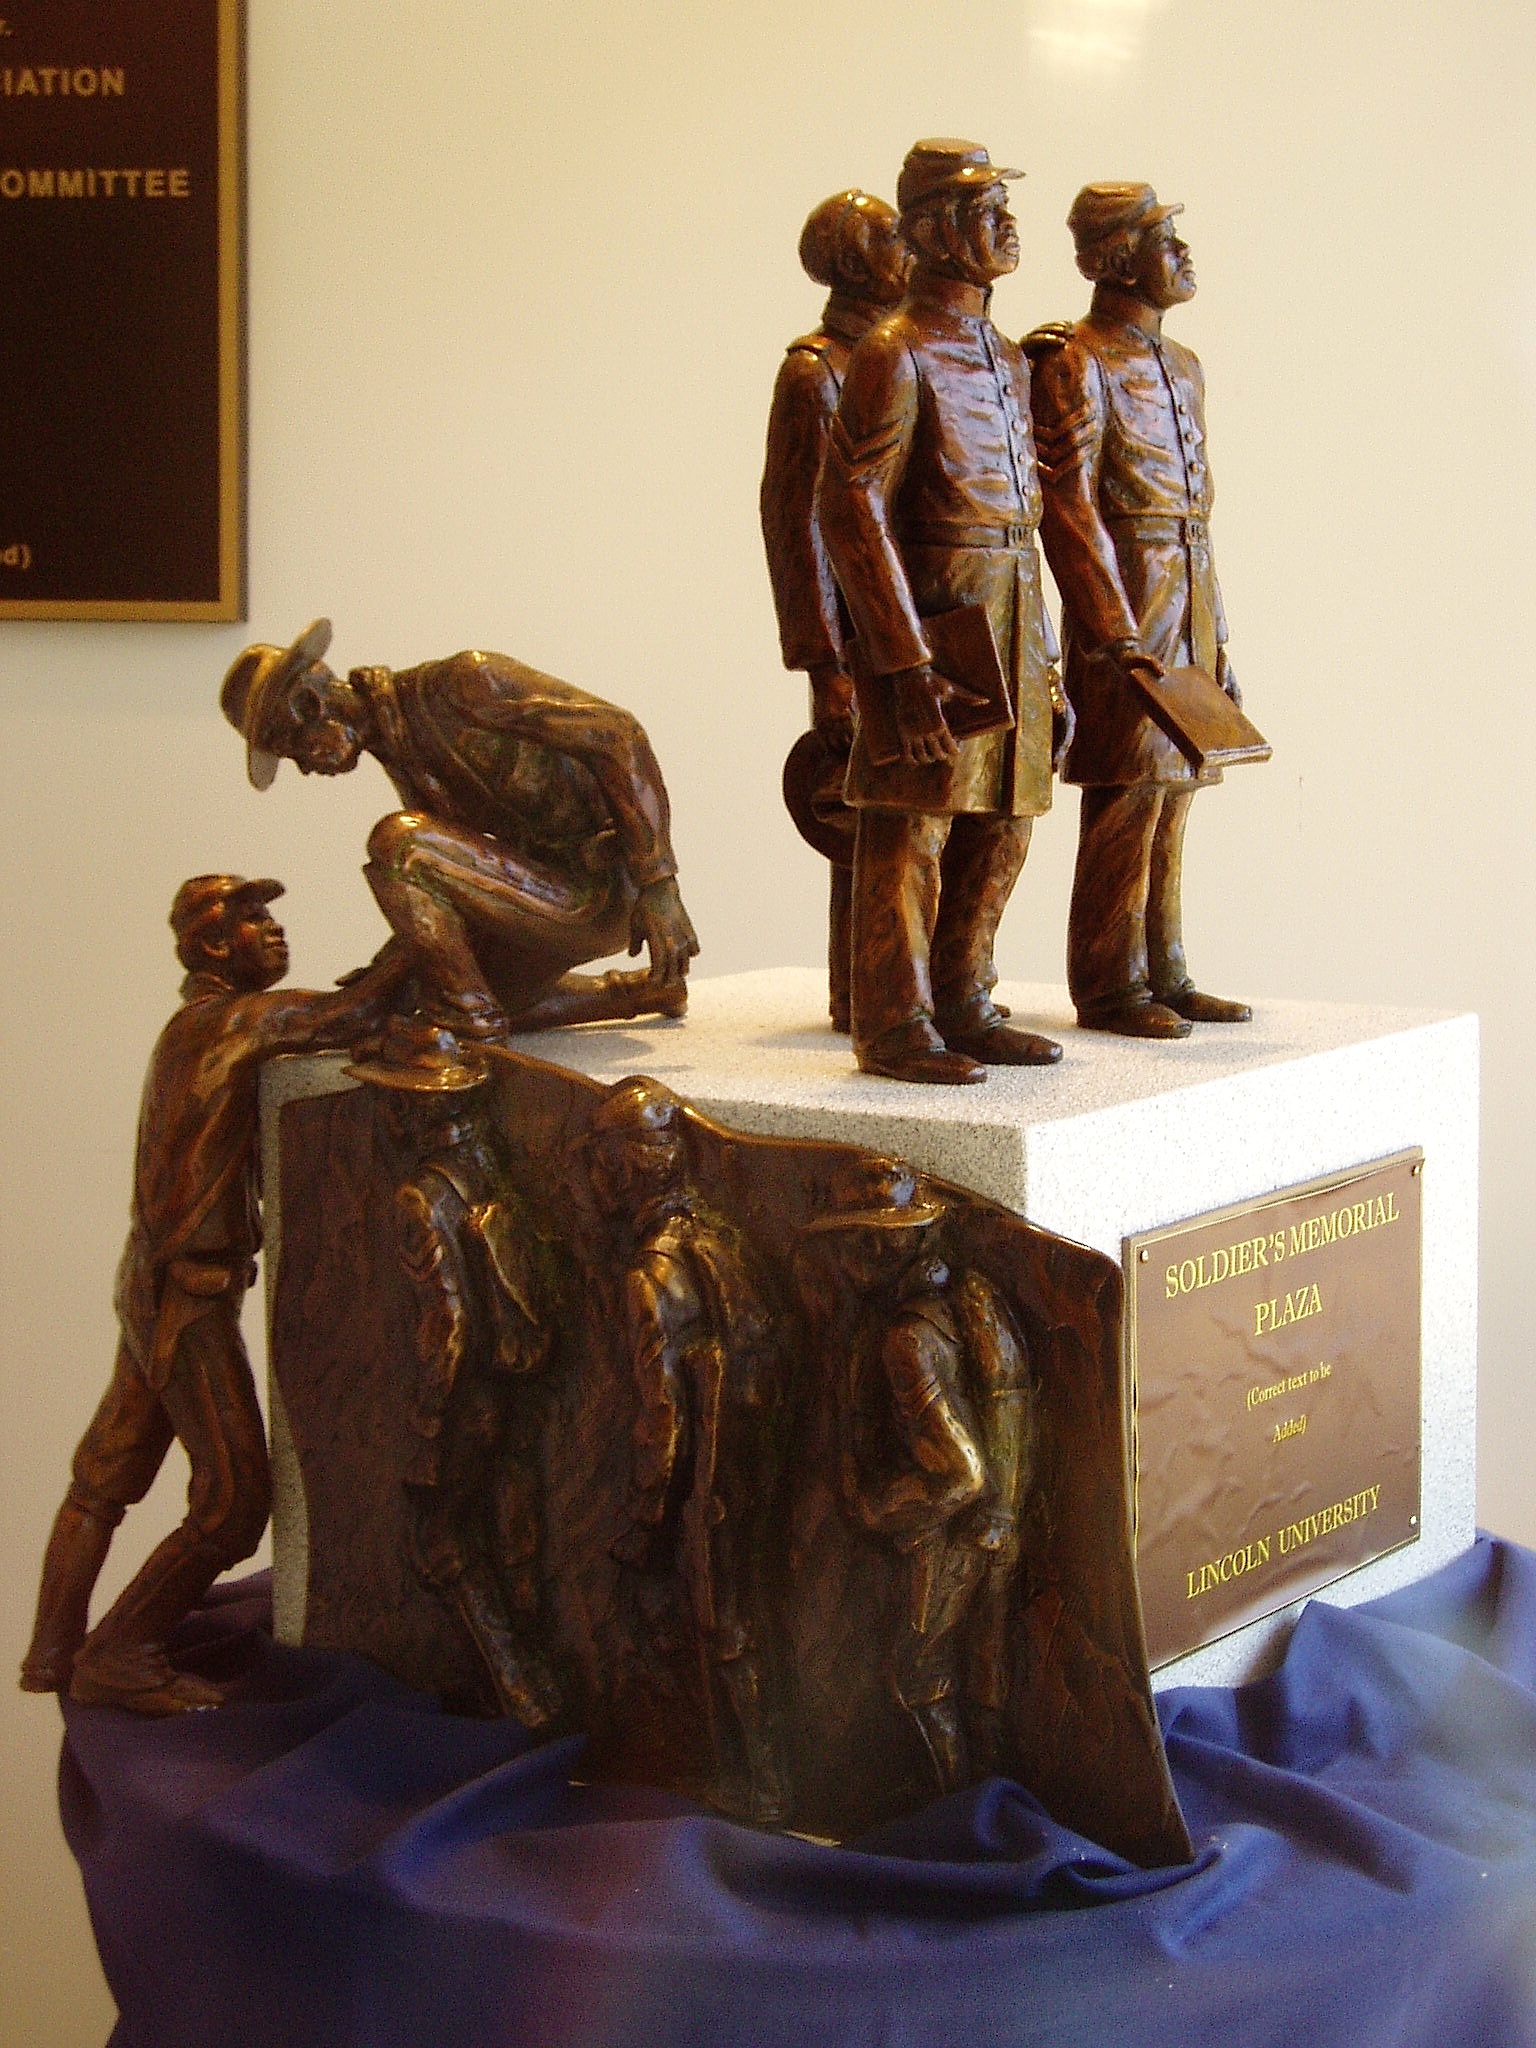 Model for the Lincoln University statue by Ed Dwight, Soldier’s Memorial, 2007 (now completed)